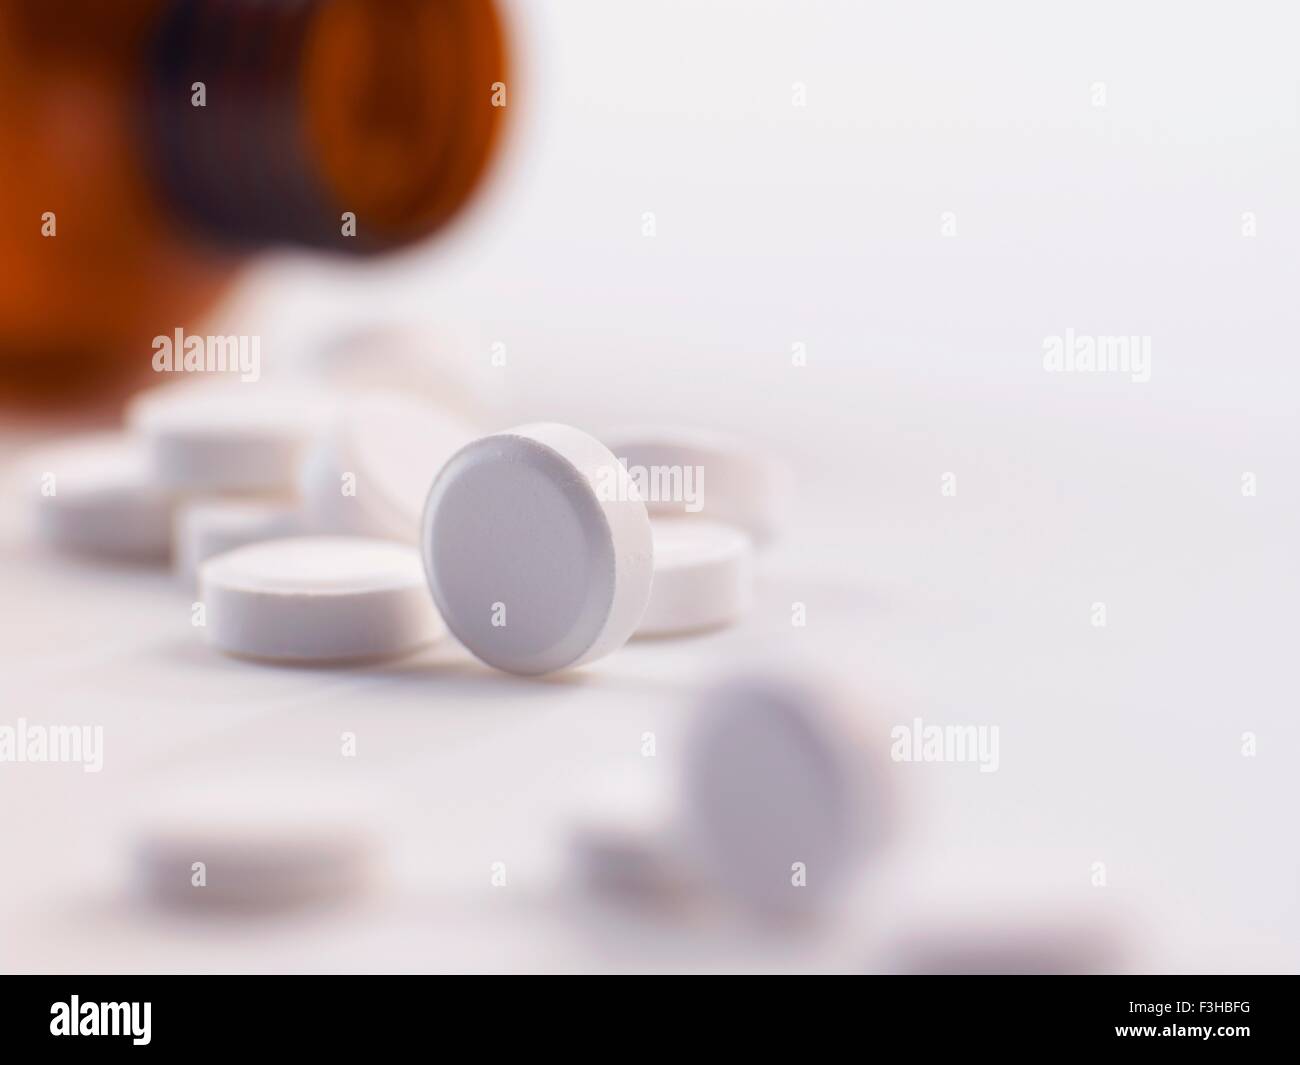 Pain killer pills spilling out of a bottle Stock Photo